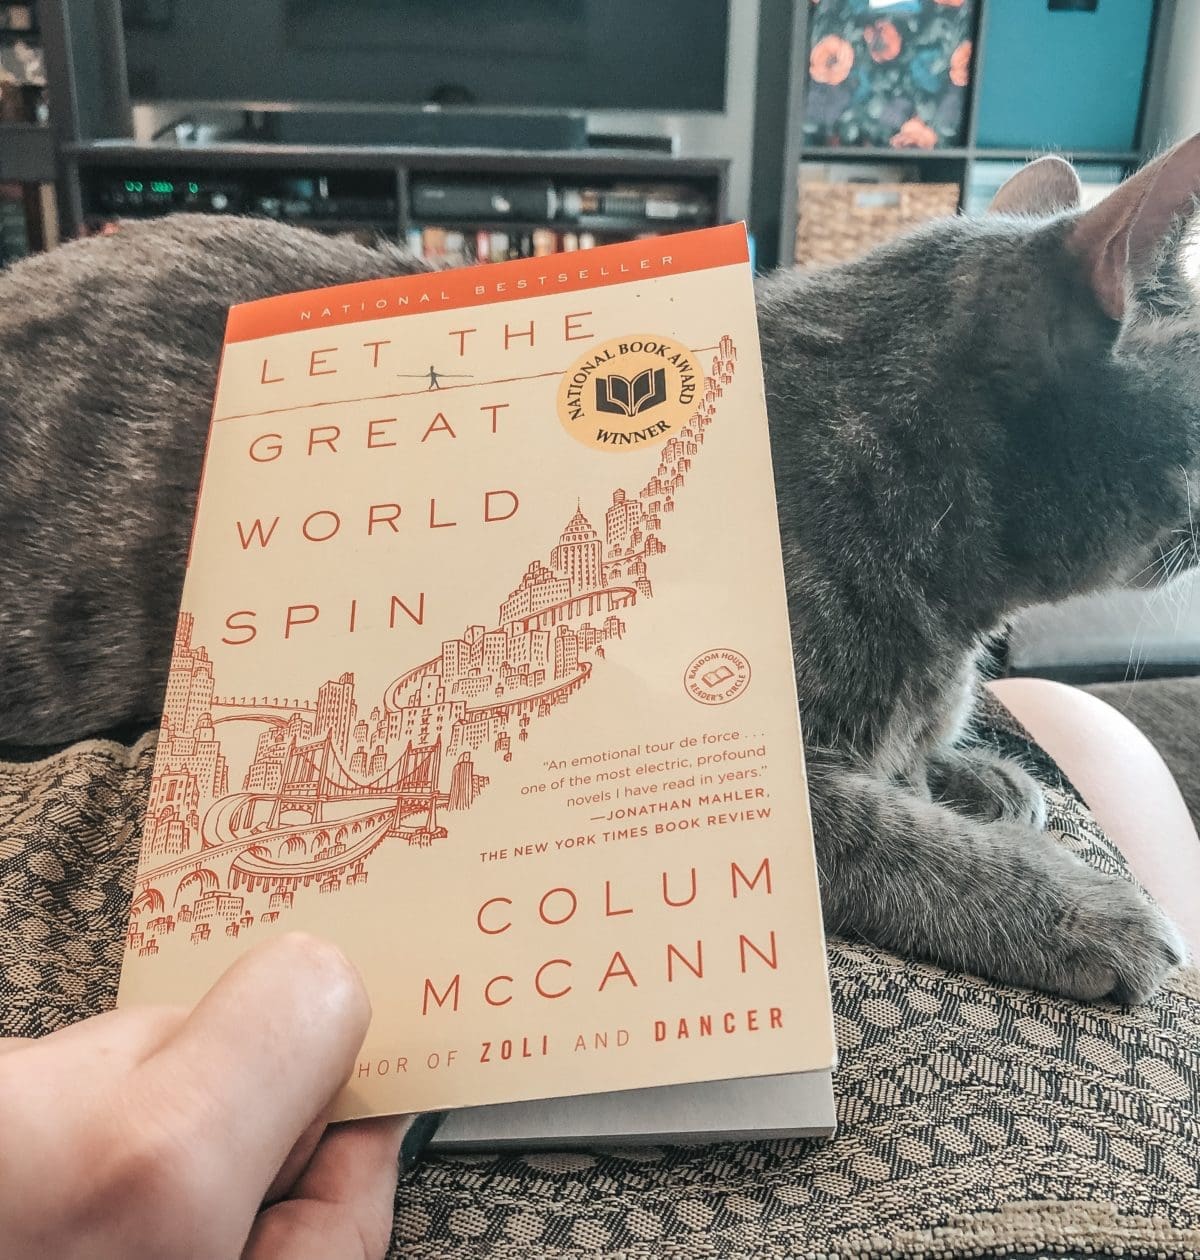 Let the Great World Spin by Colum MCCann, photo by Christine Csencsitz